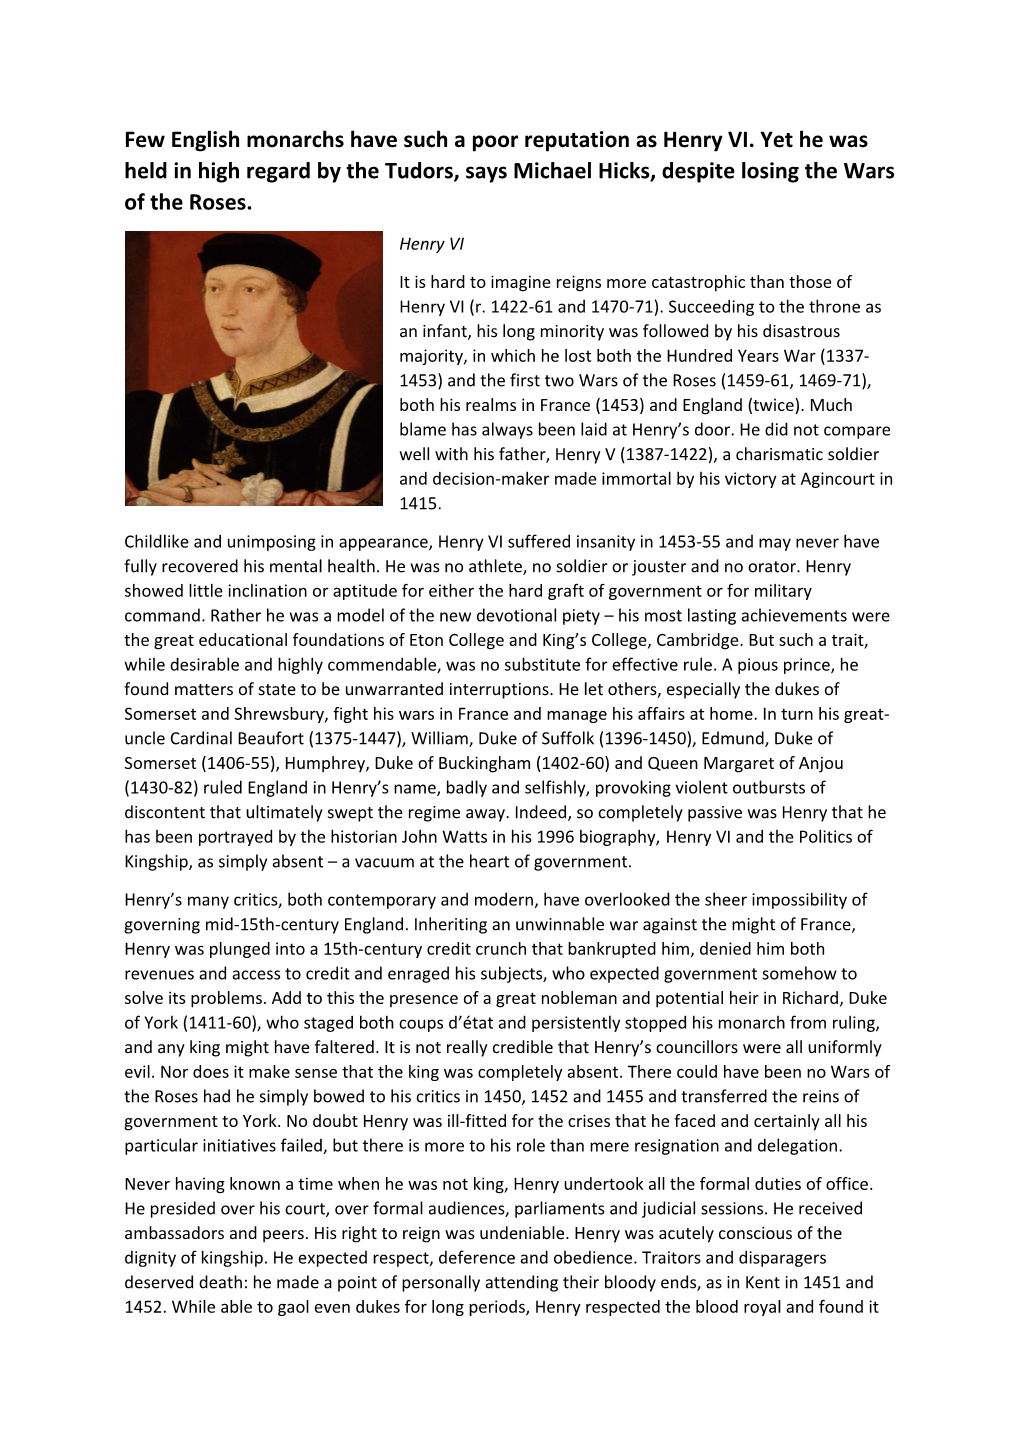 Few English Monarchs Have Such a Poor Reputation As Henry VI. Yet He Was Held in High